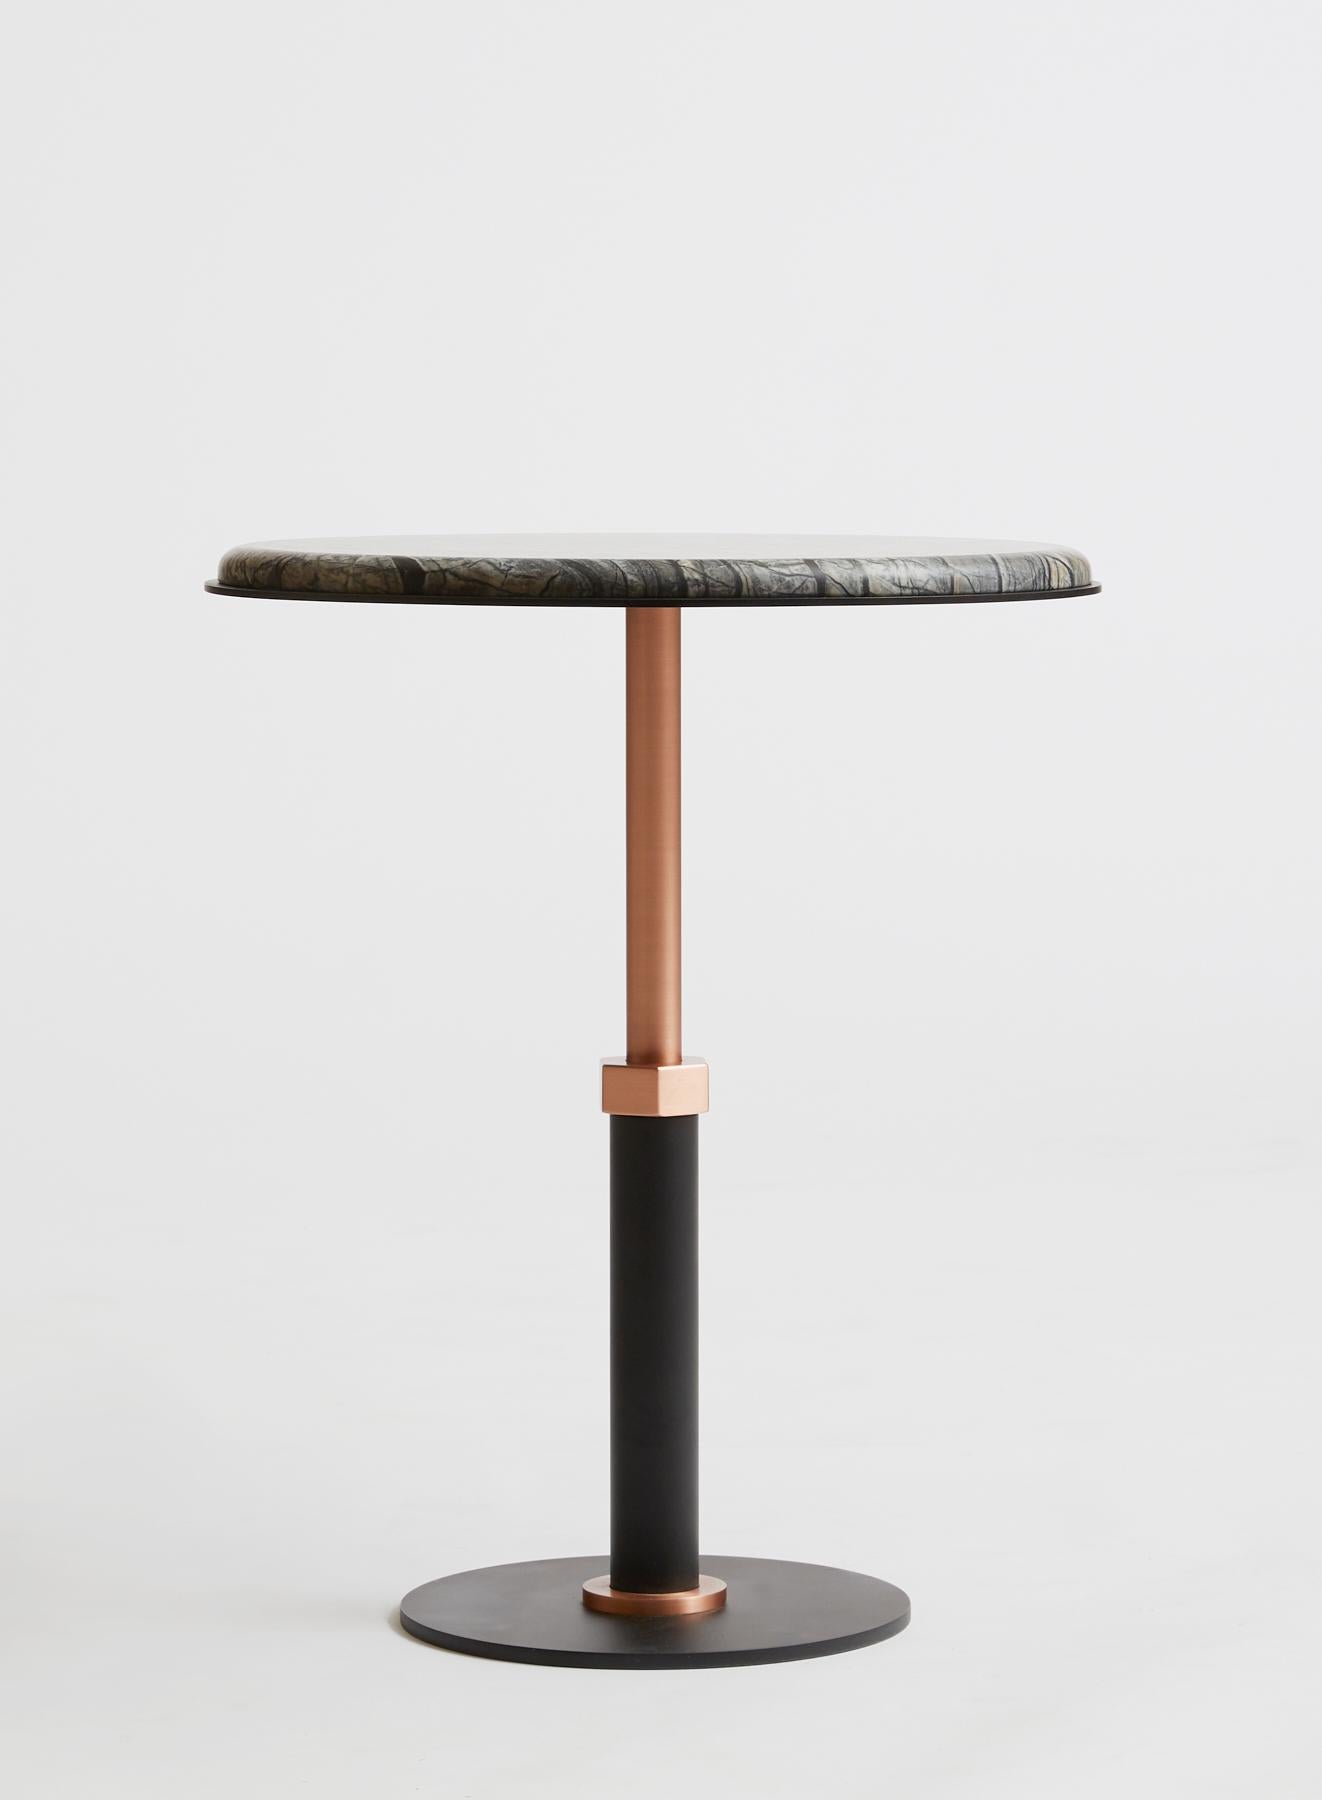 Silver (Onda D'Argento - Silver) Pedestal Round Side Table in Black Steel and Satin Copper Base by Gabriel Scott 2